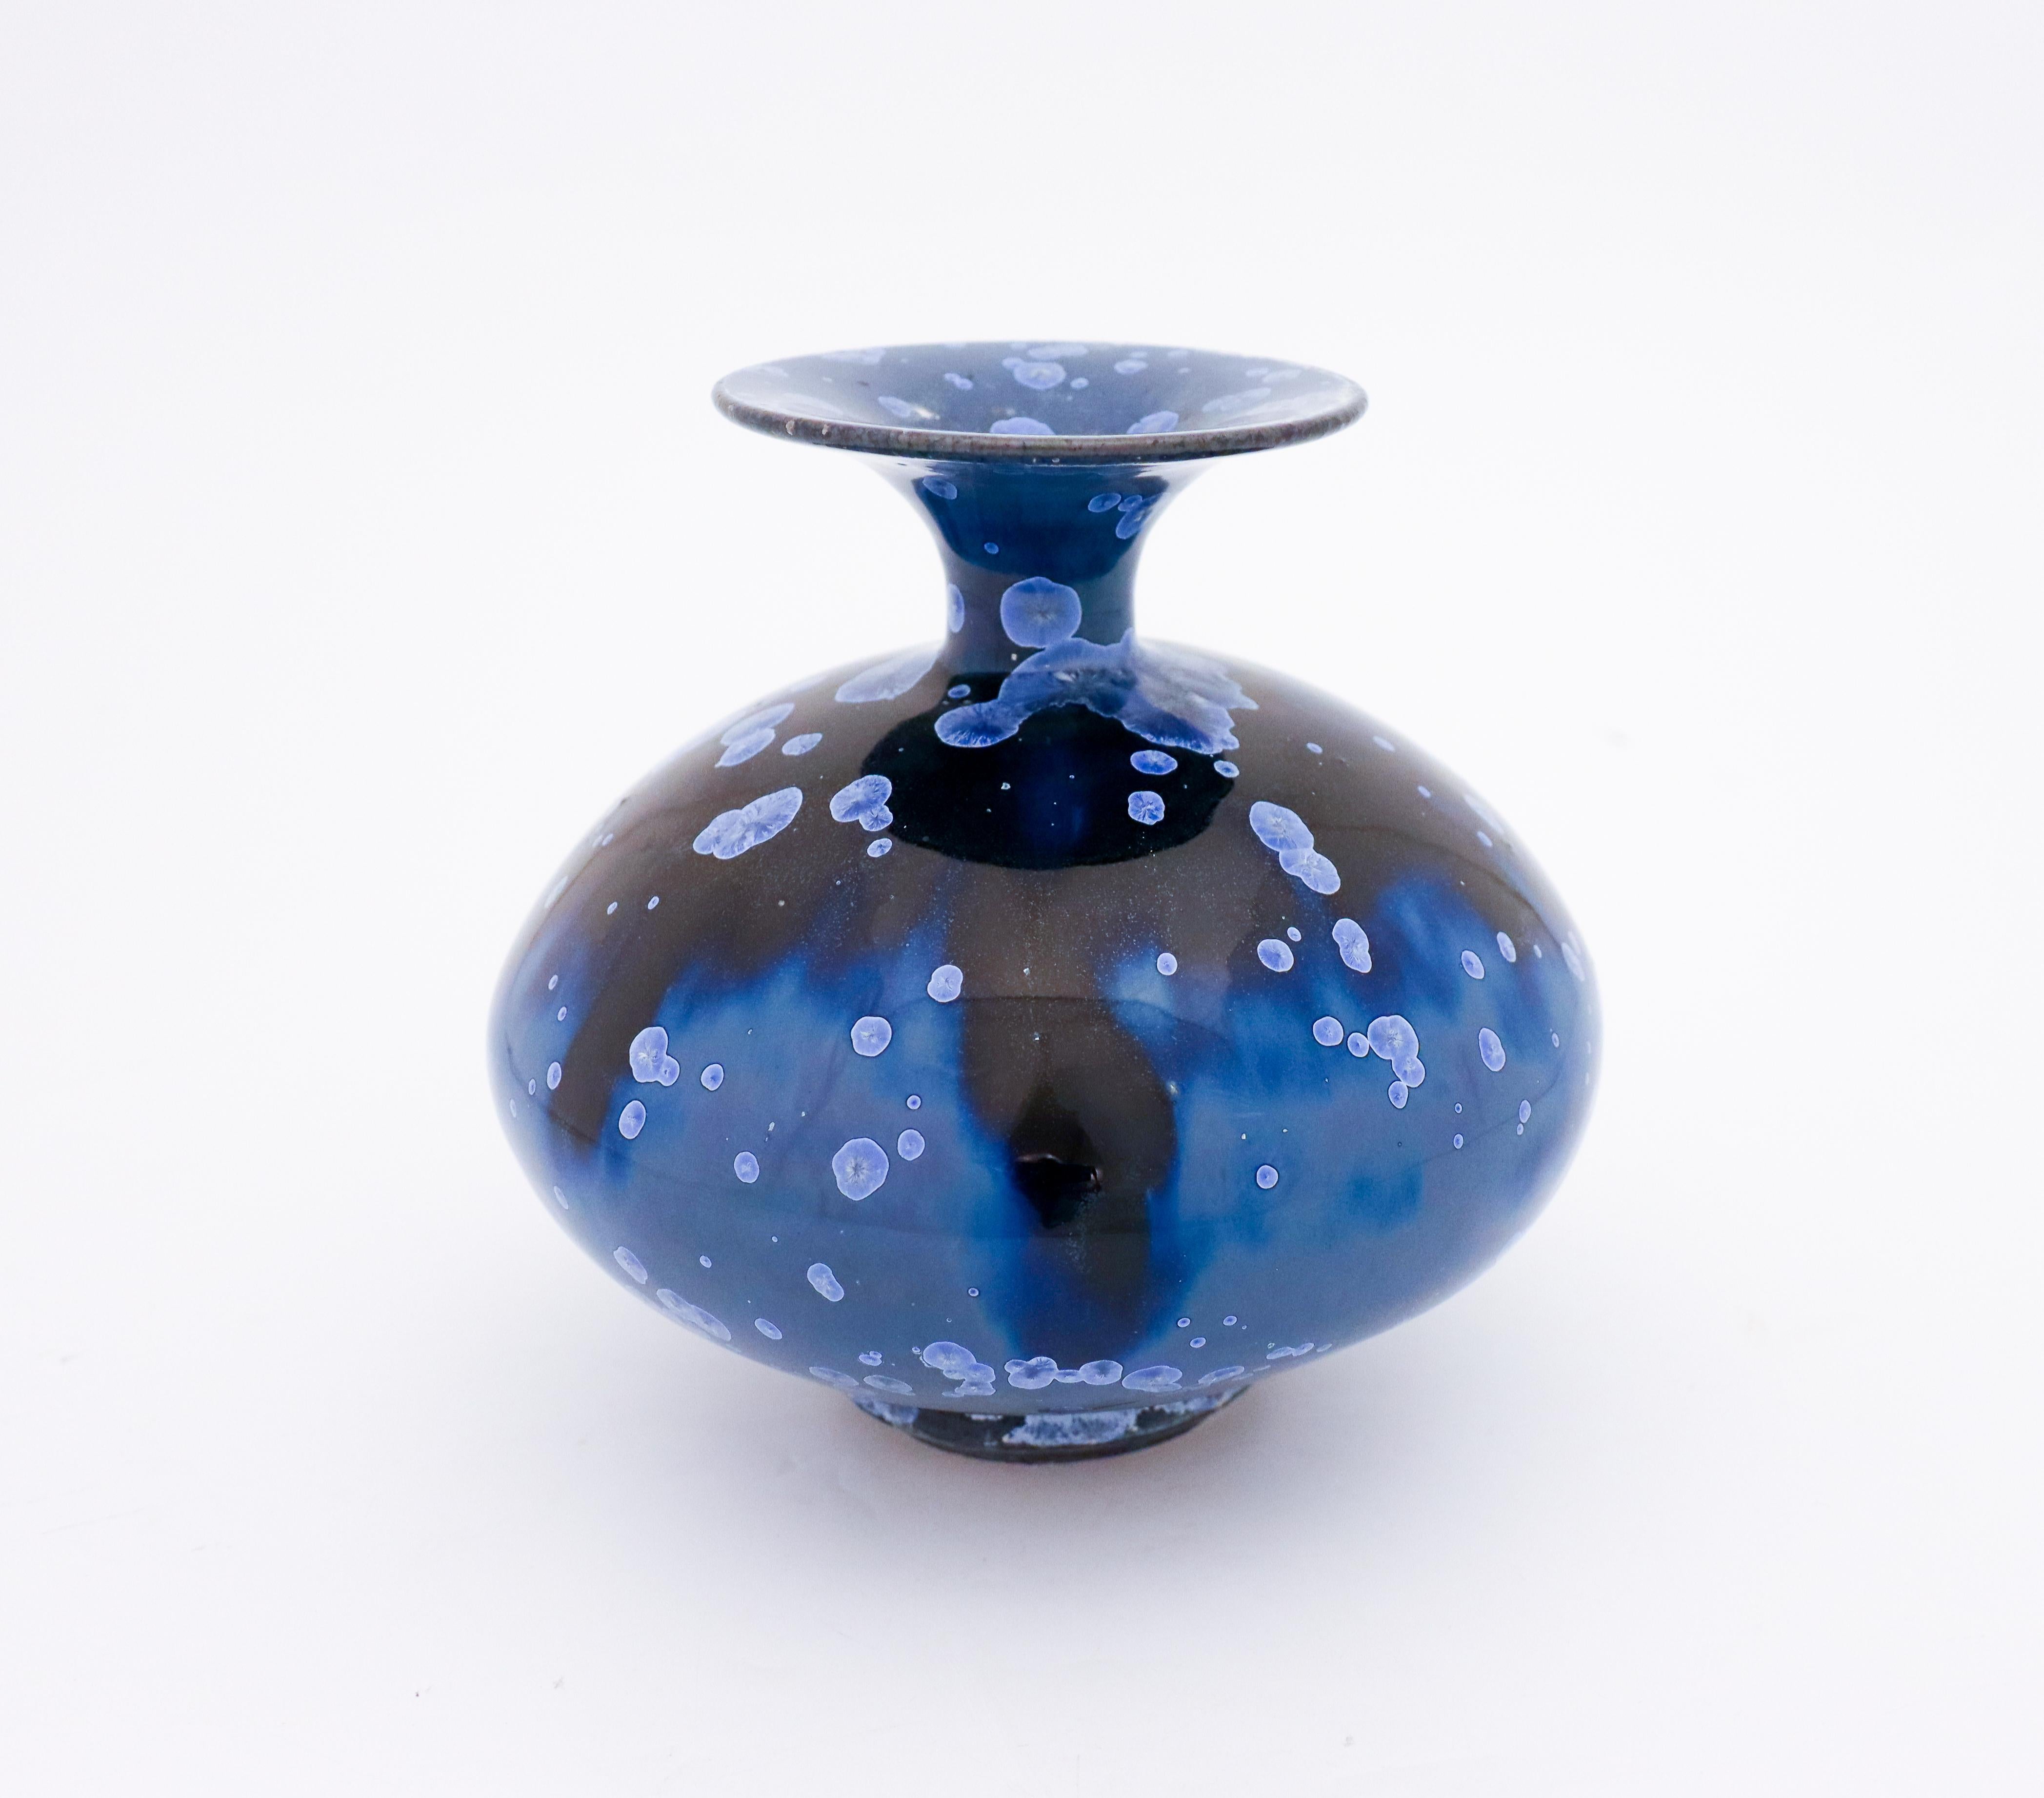 A unique vase in a black & blue crystalline glaze designed by the contemporary Swedish artist Isak Isaksson in his own studio. The vase is 17.5 cm (7